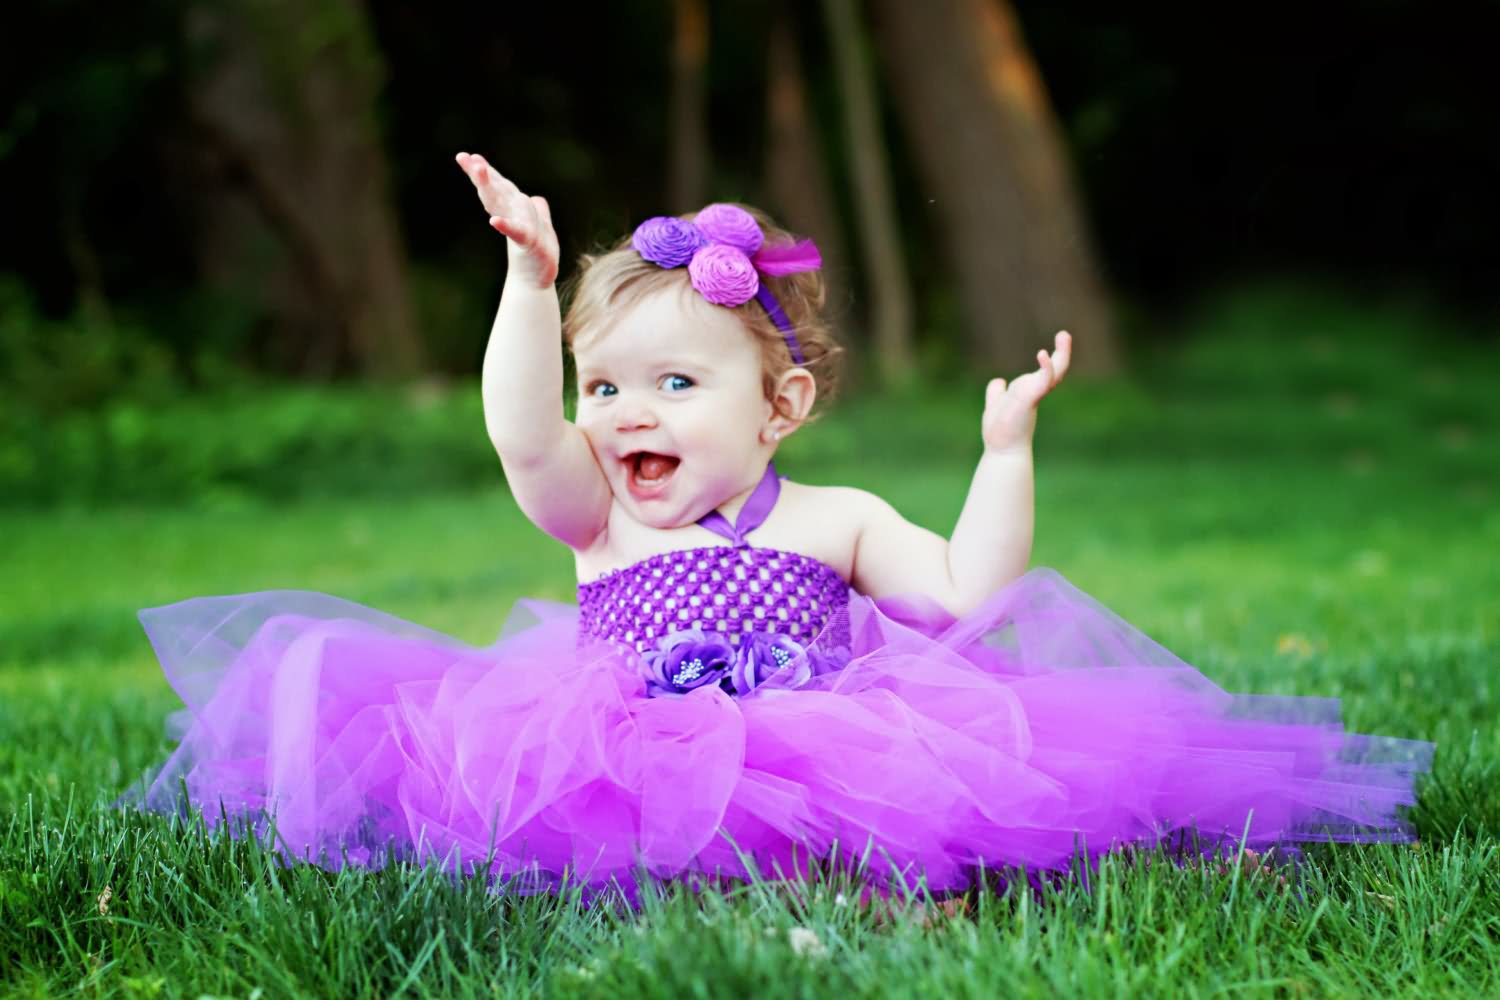 25 Very Cute Babies Pictures